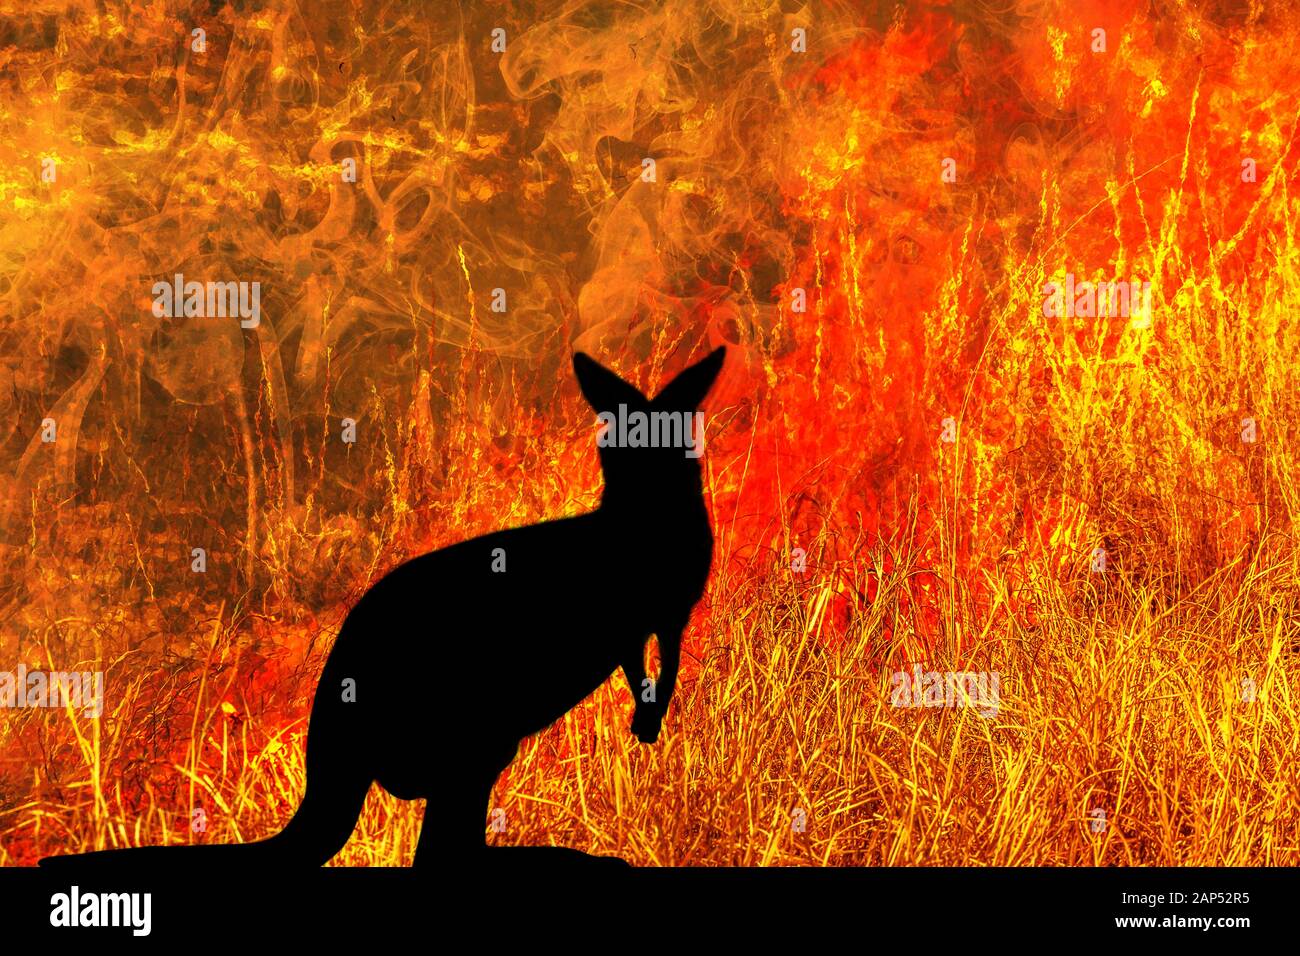 kangaroo silhouette looking a fire in Australia forests. Australian wildlife in bushfires 2019 and 2020. Conceptual: save kangaroos, global warming Stock Photo